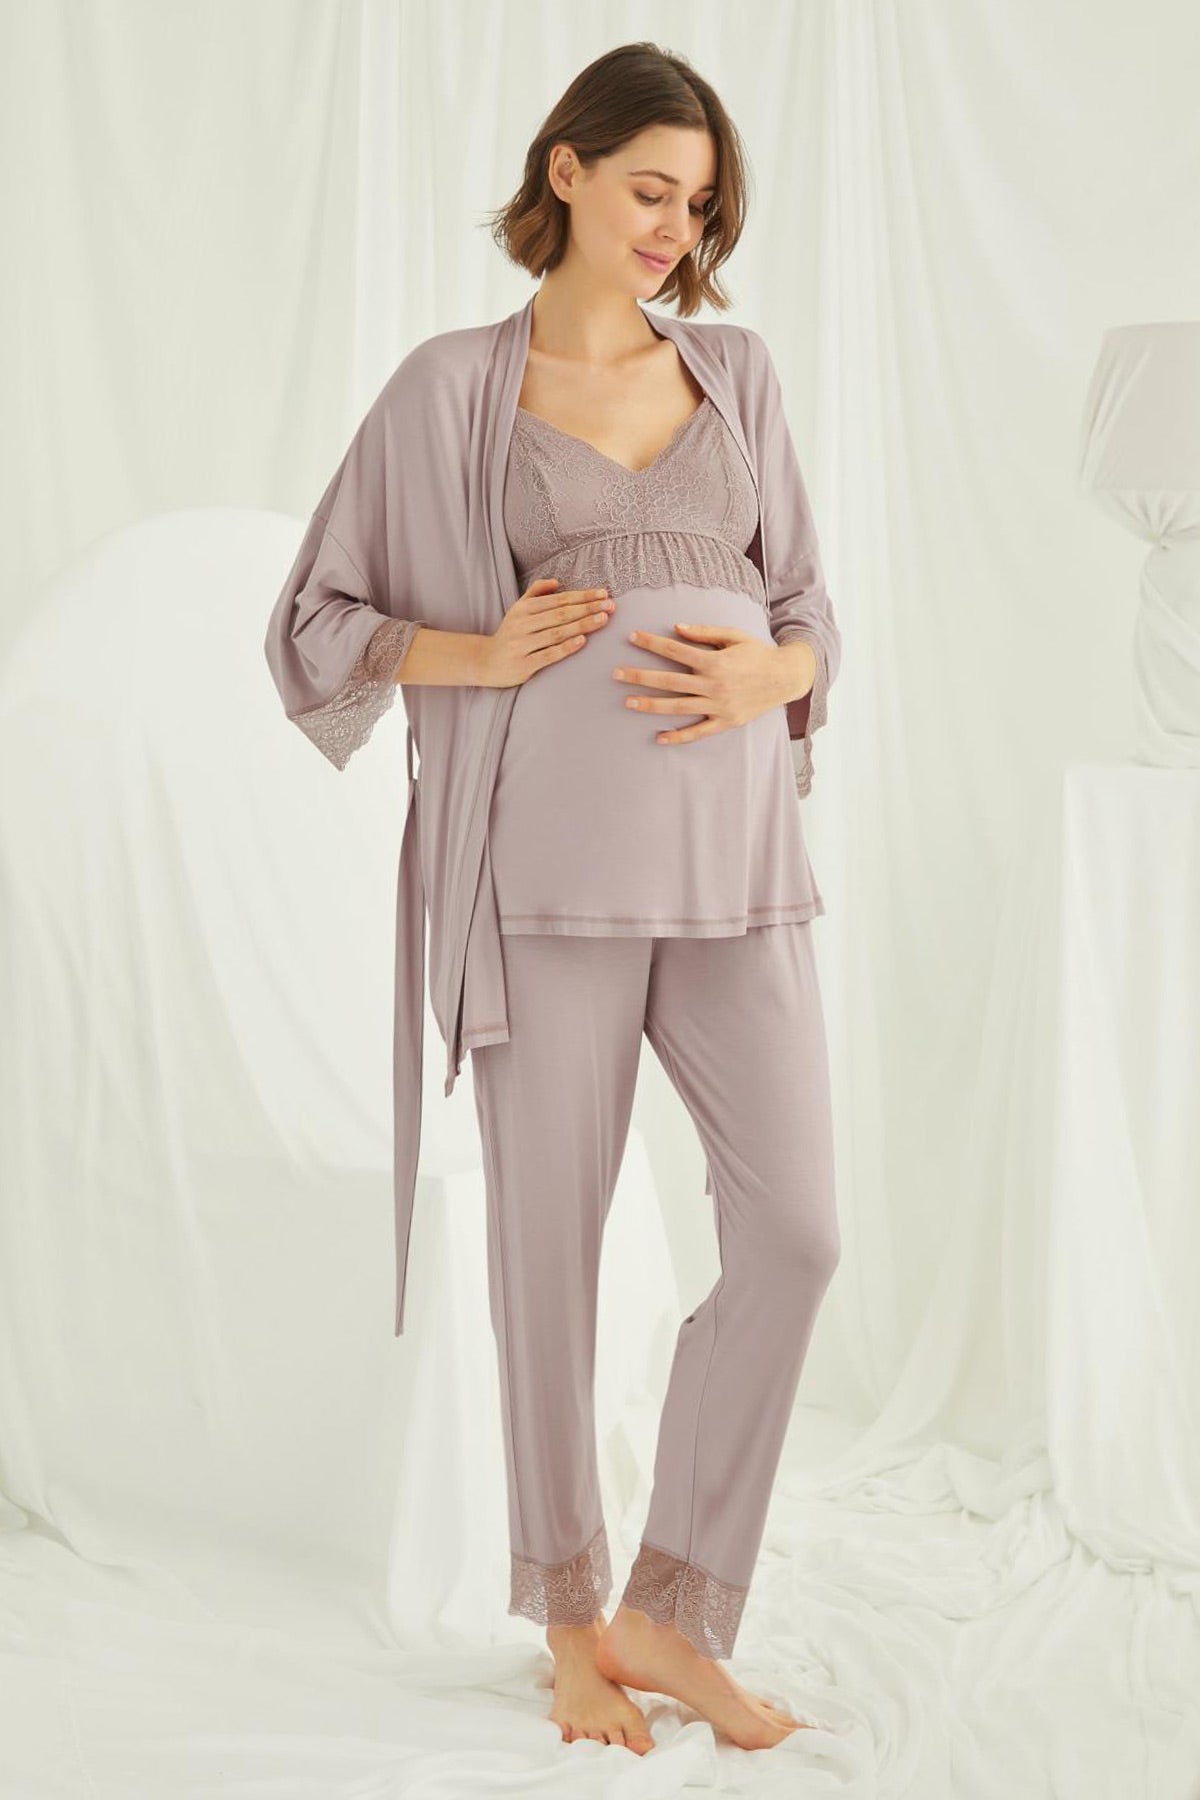 Shopymommy 18431 Lace Strappy 3-Pieces Maternity & Nursing Pajamas With Robe Coffee